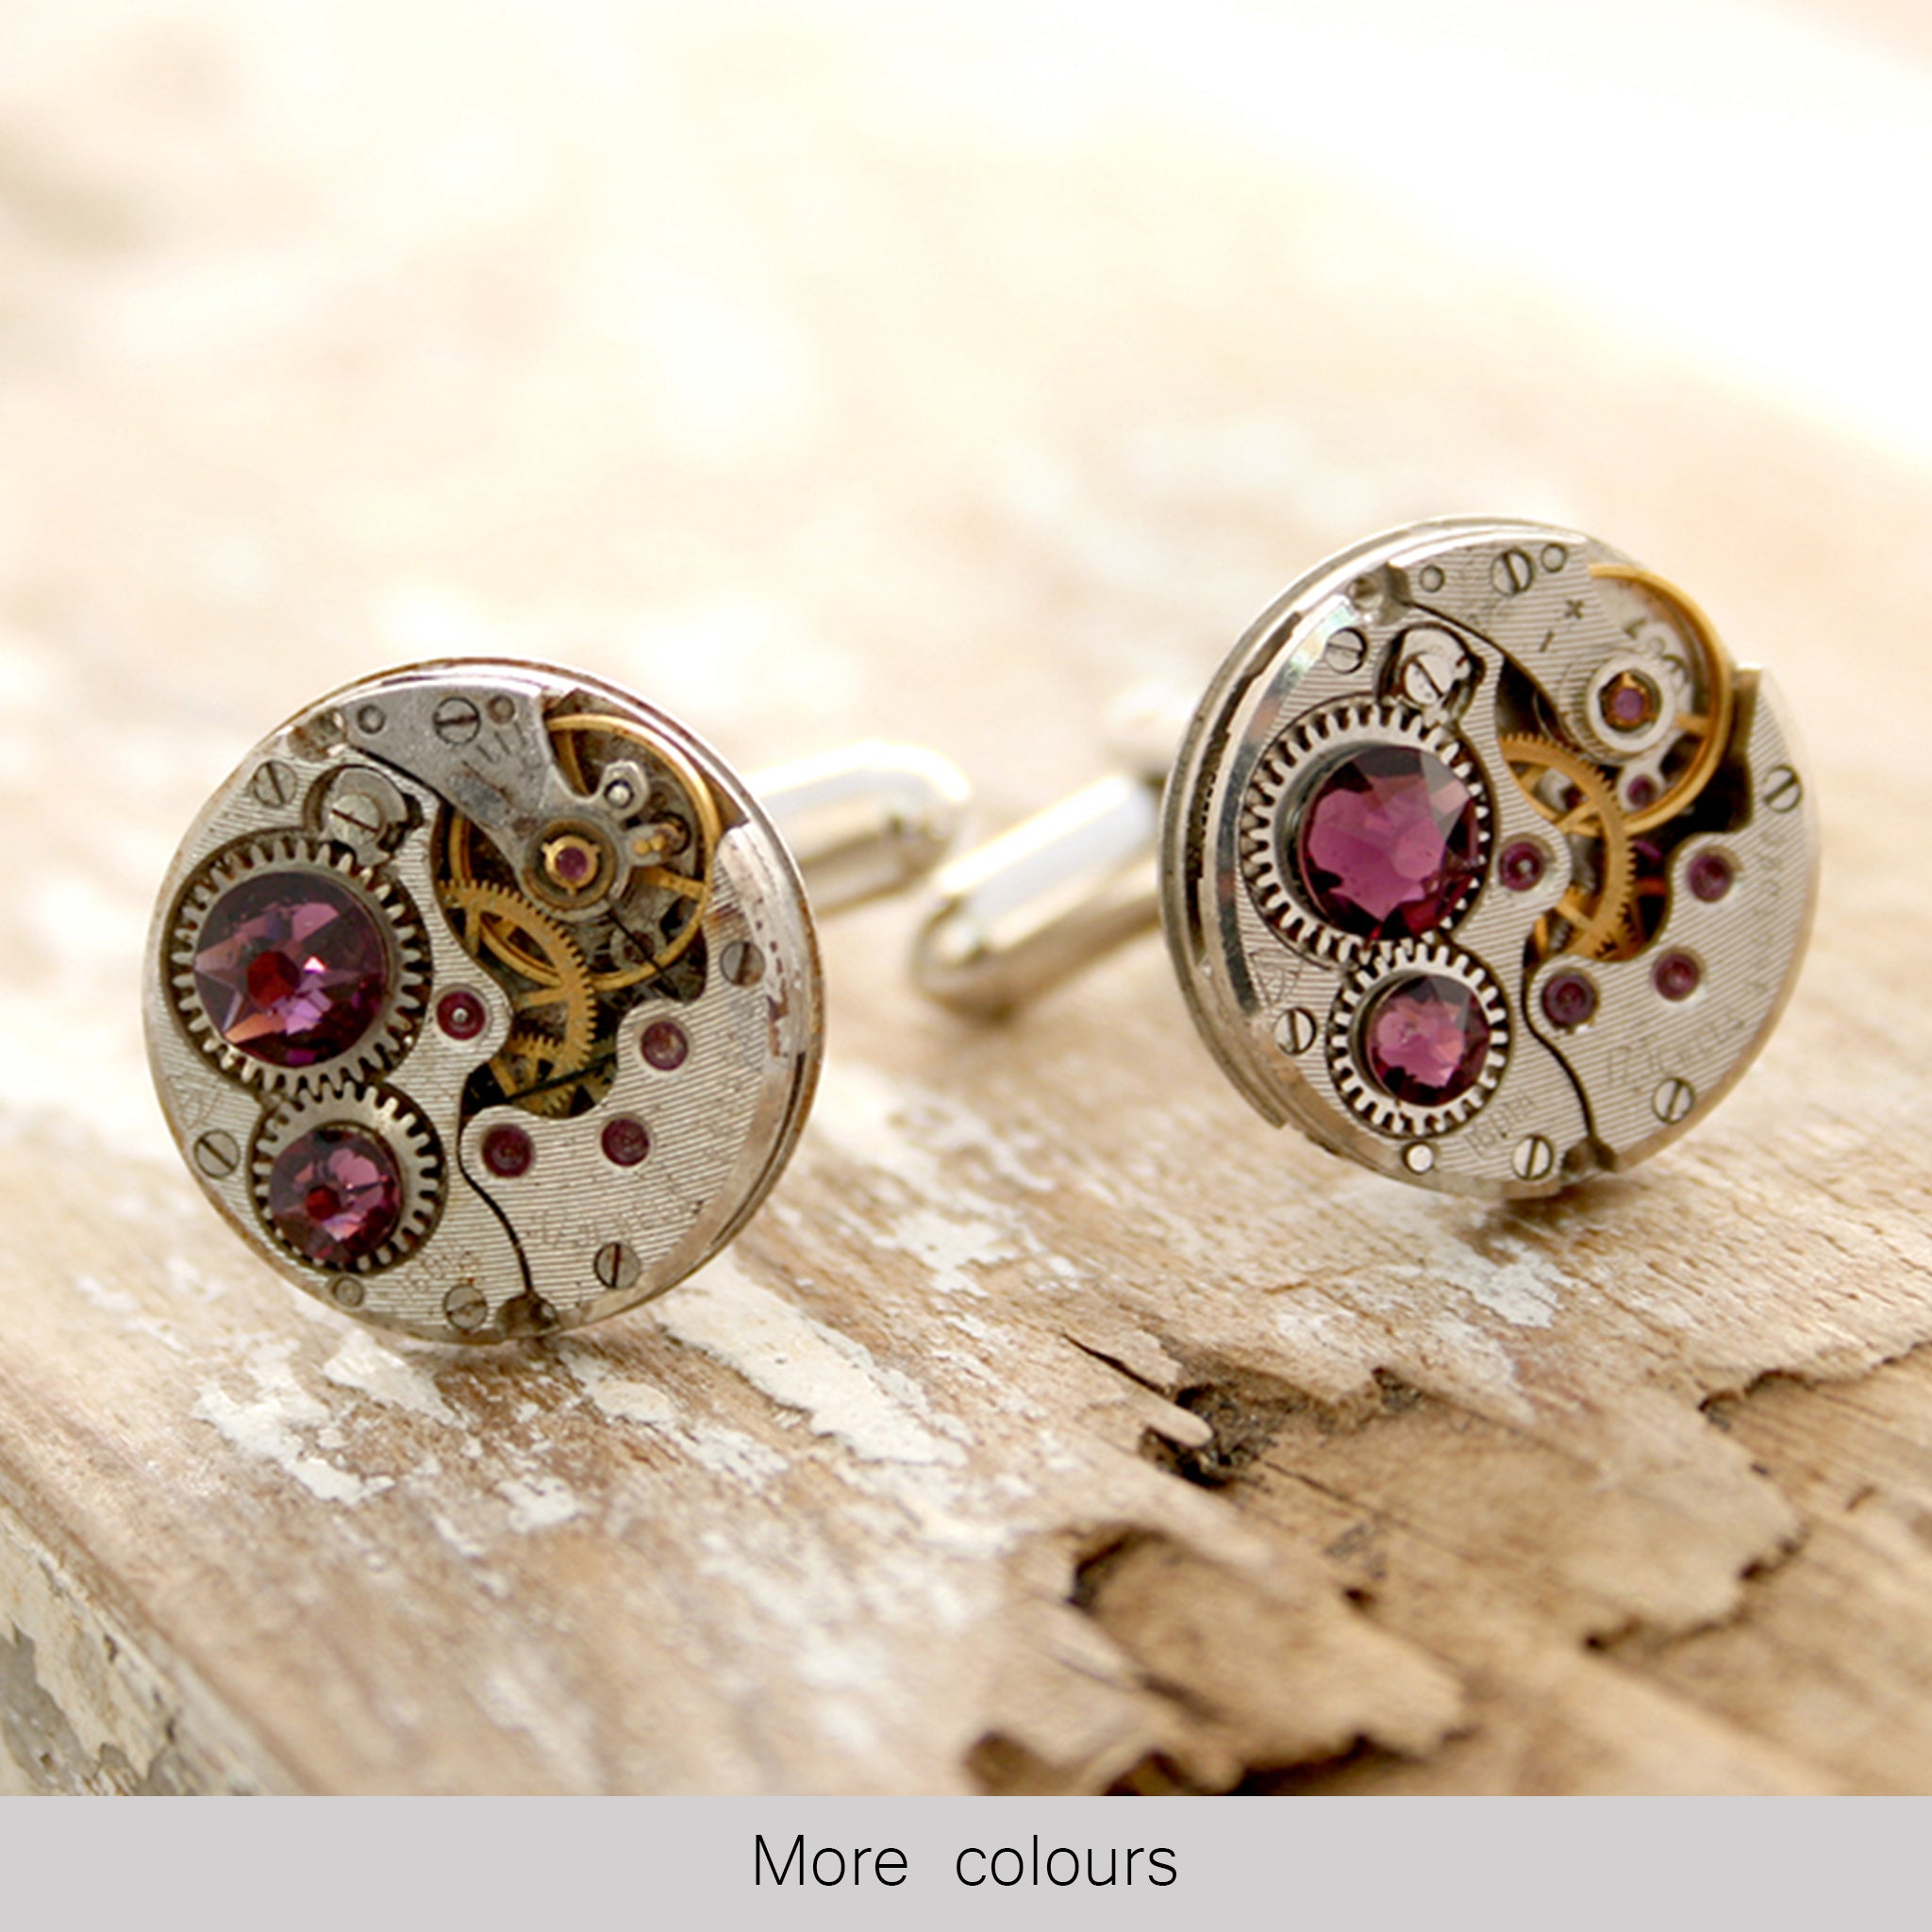  birthstone cufflinks in steampunk style featuring antique watch movements and Amethyst crystals